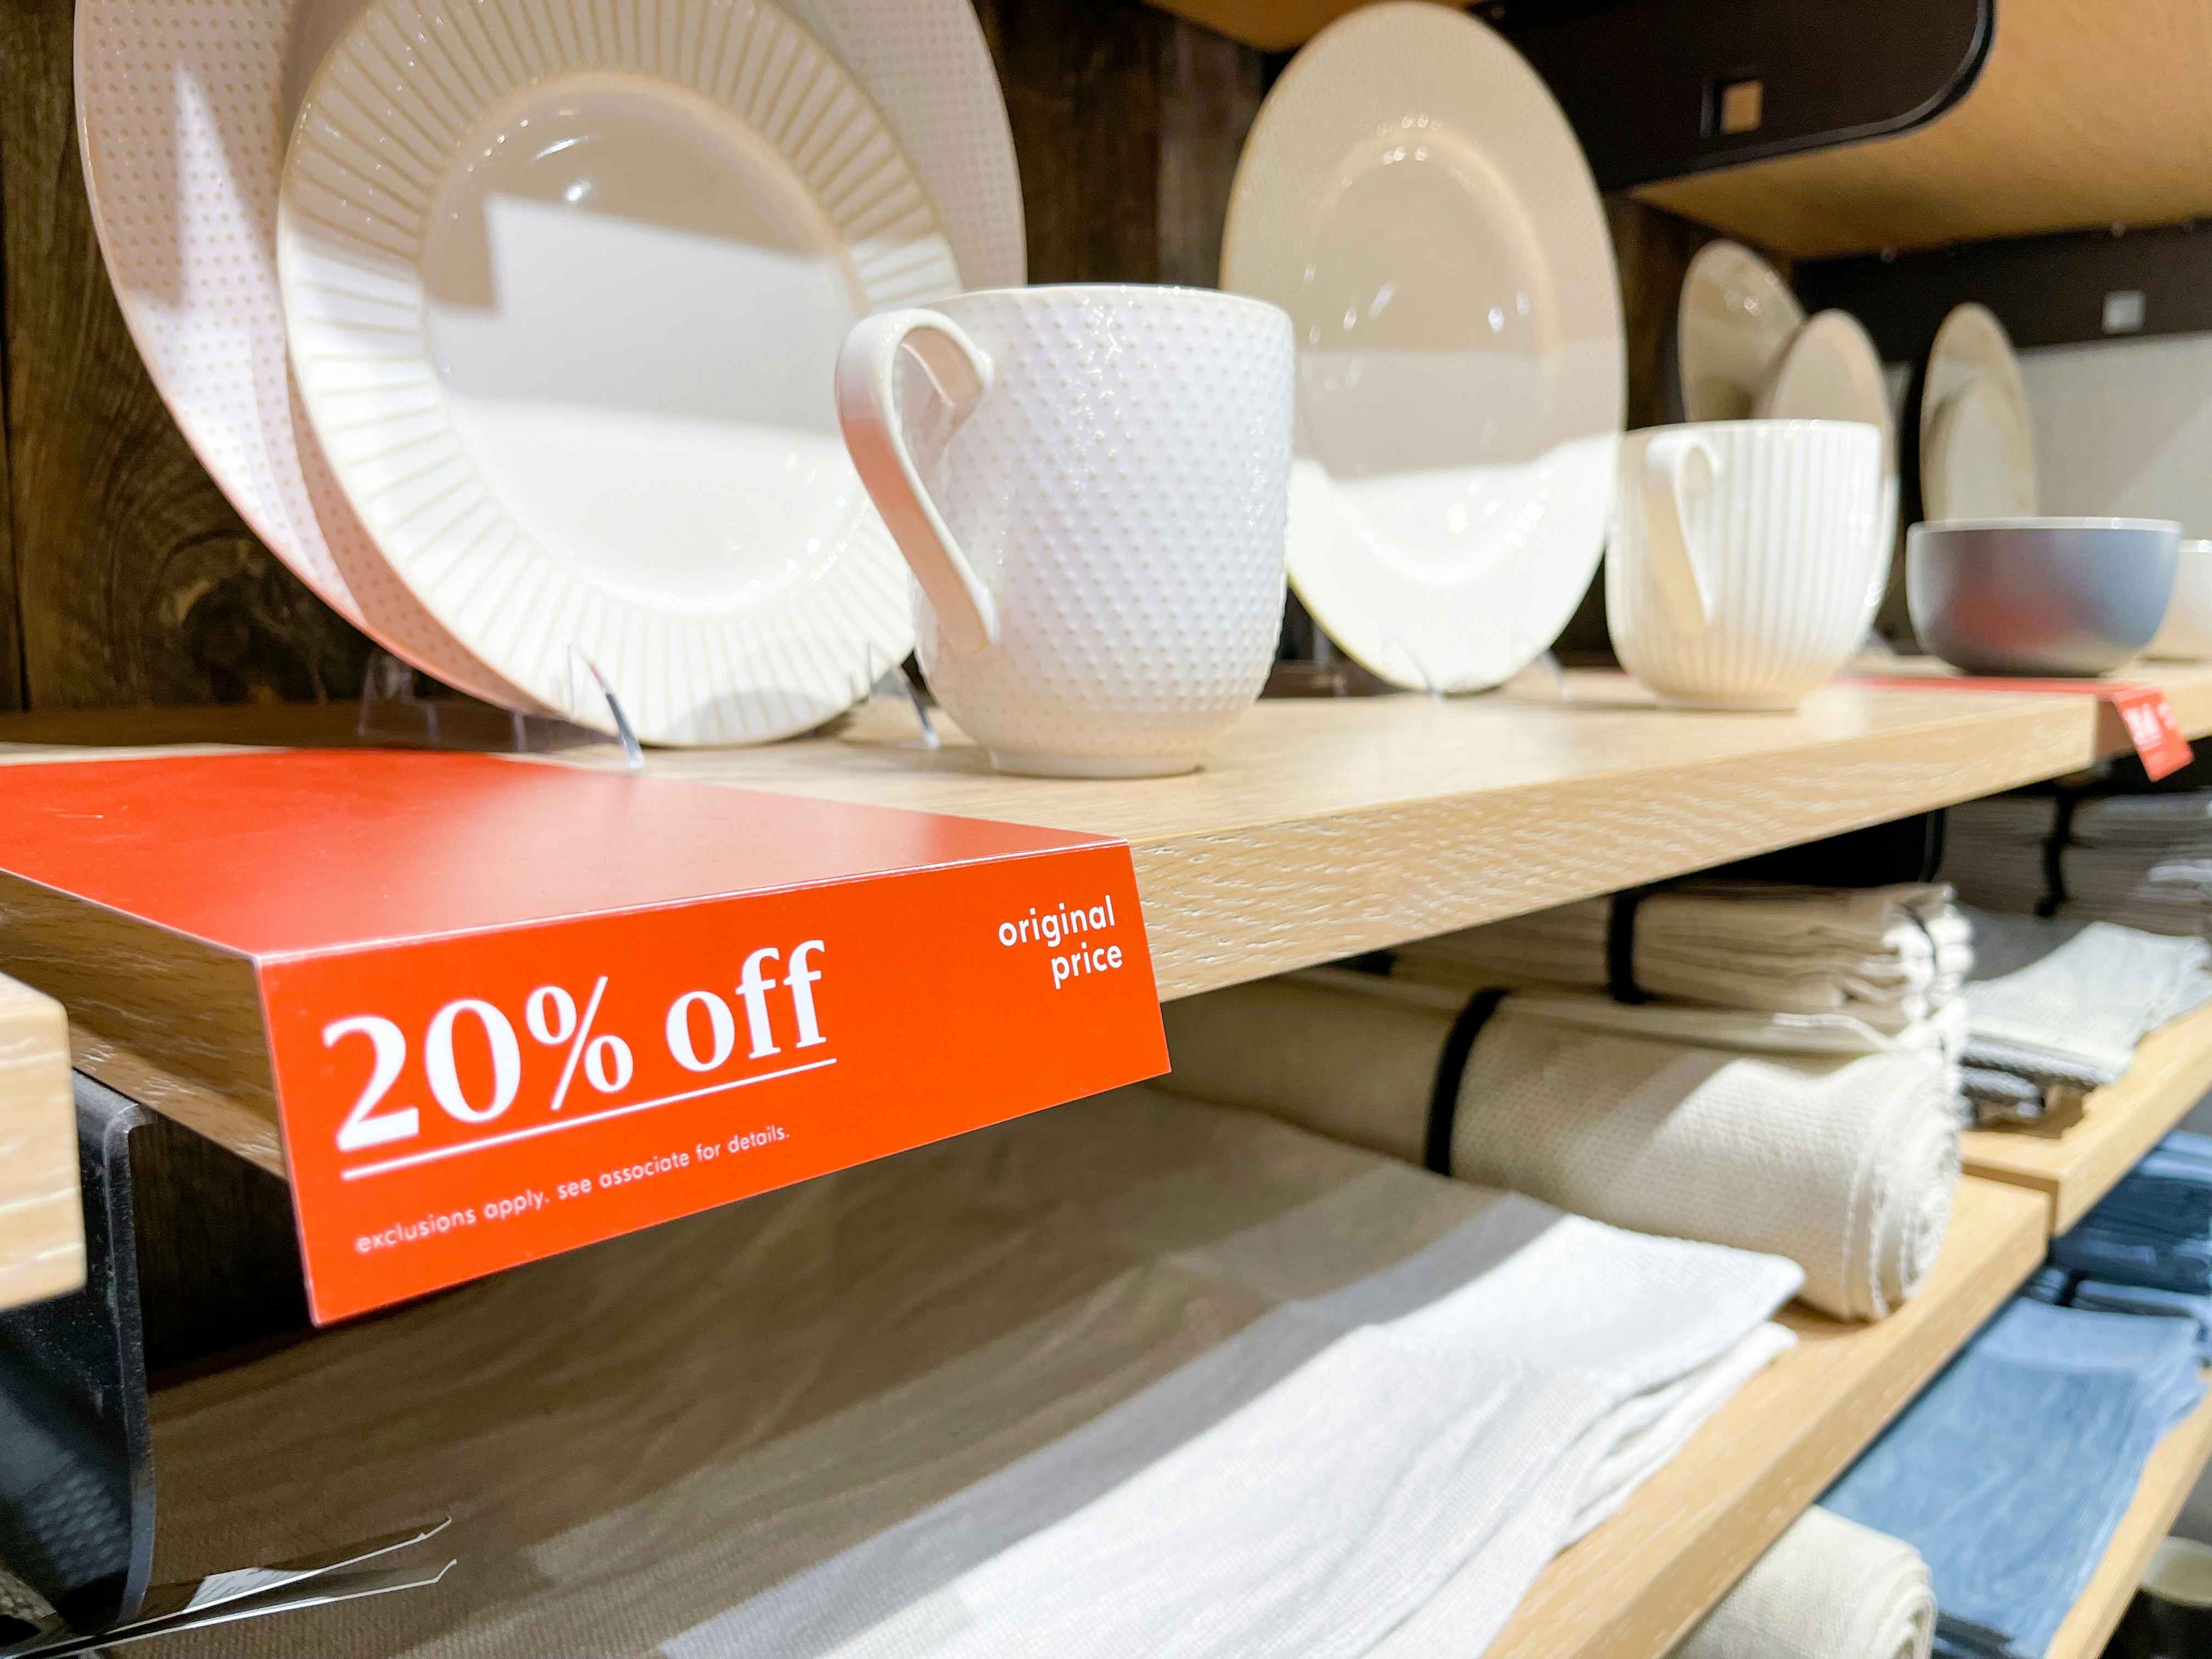 20% off sign next to plates at West Elm